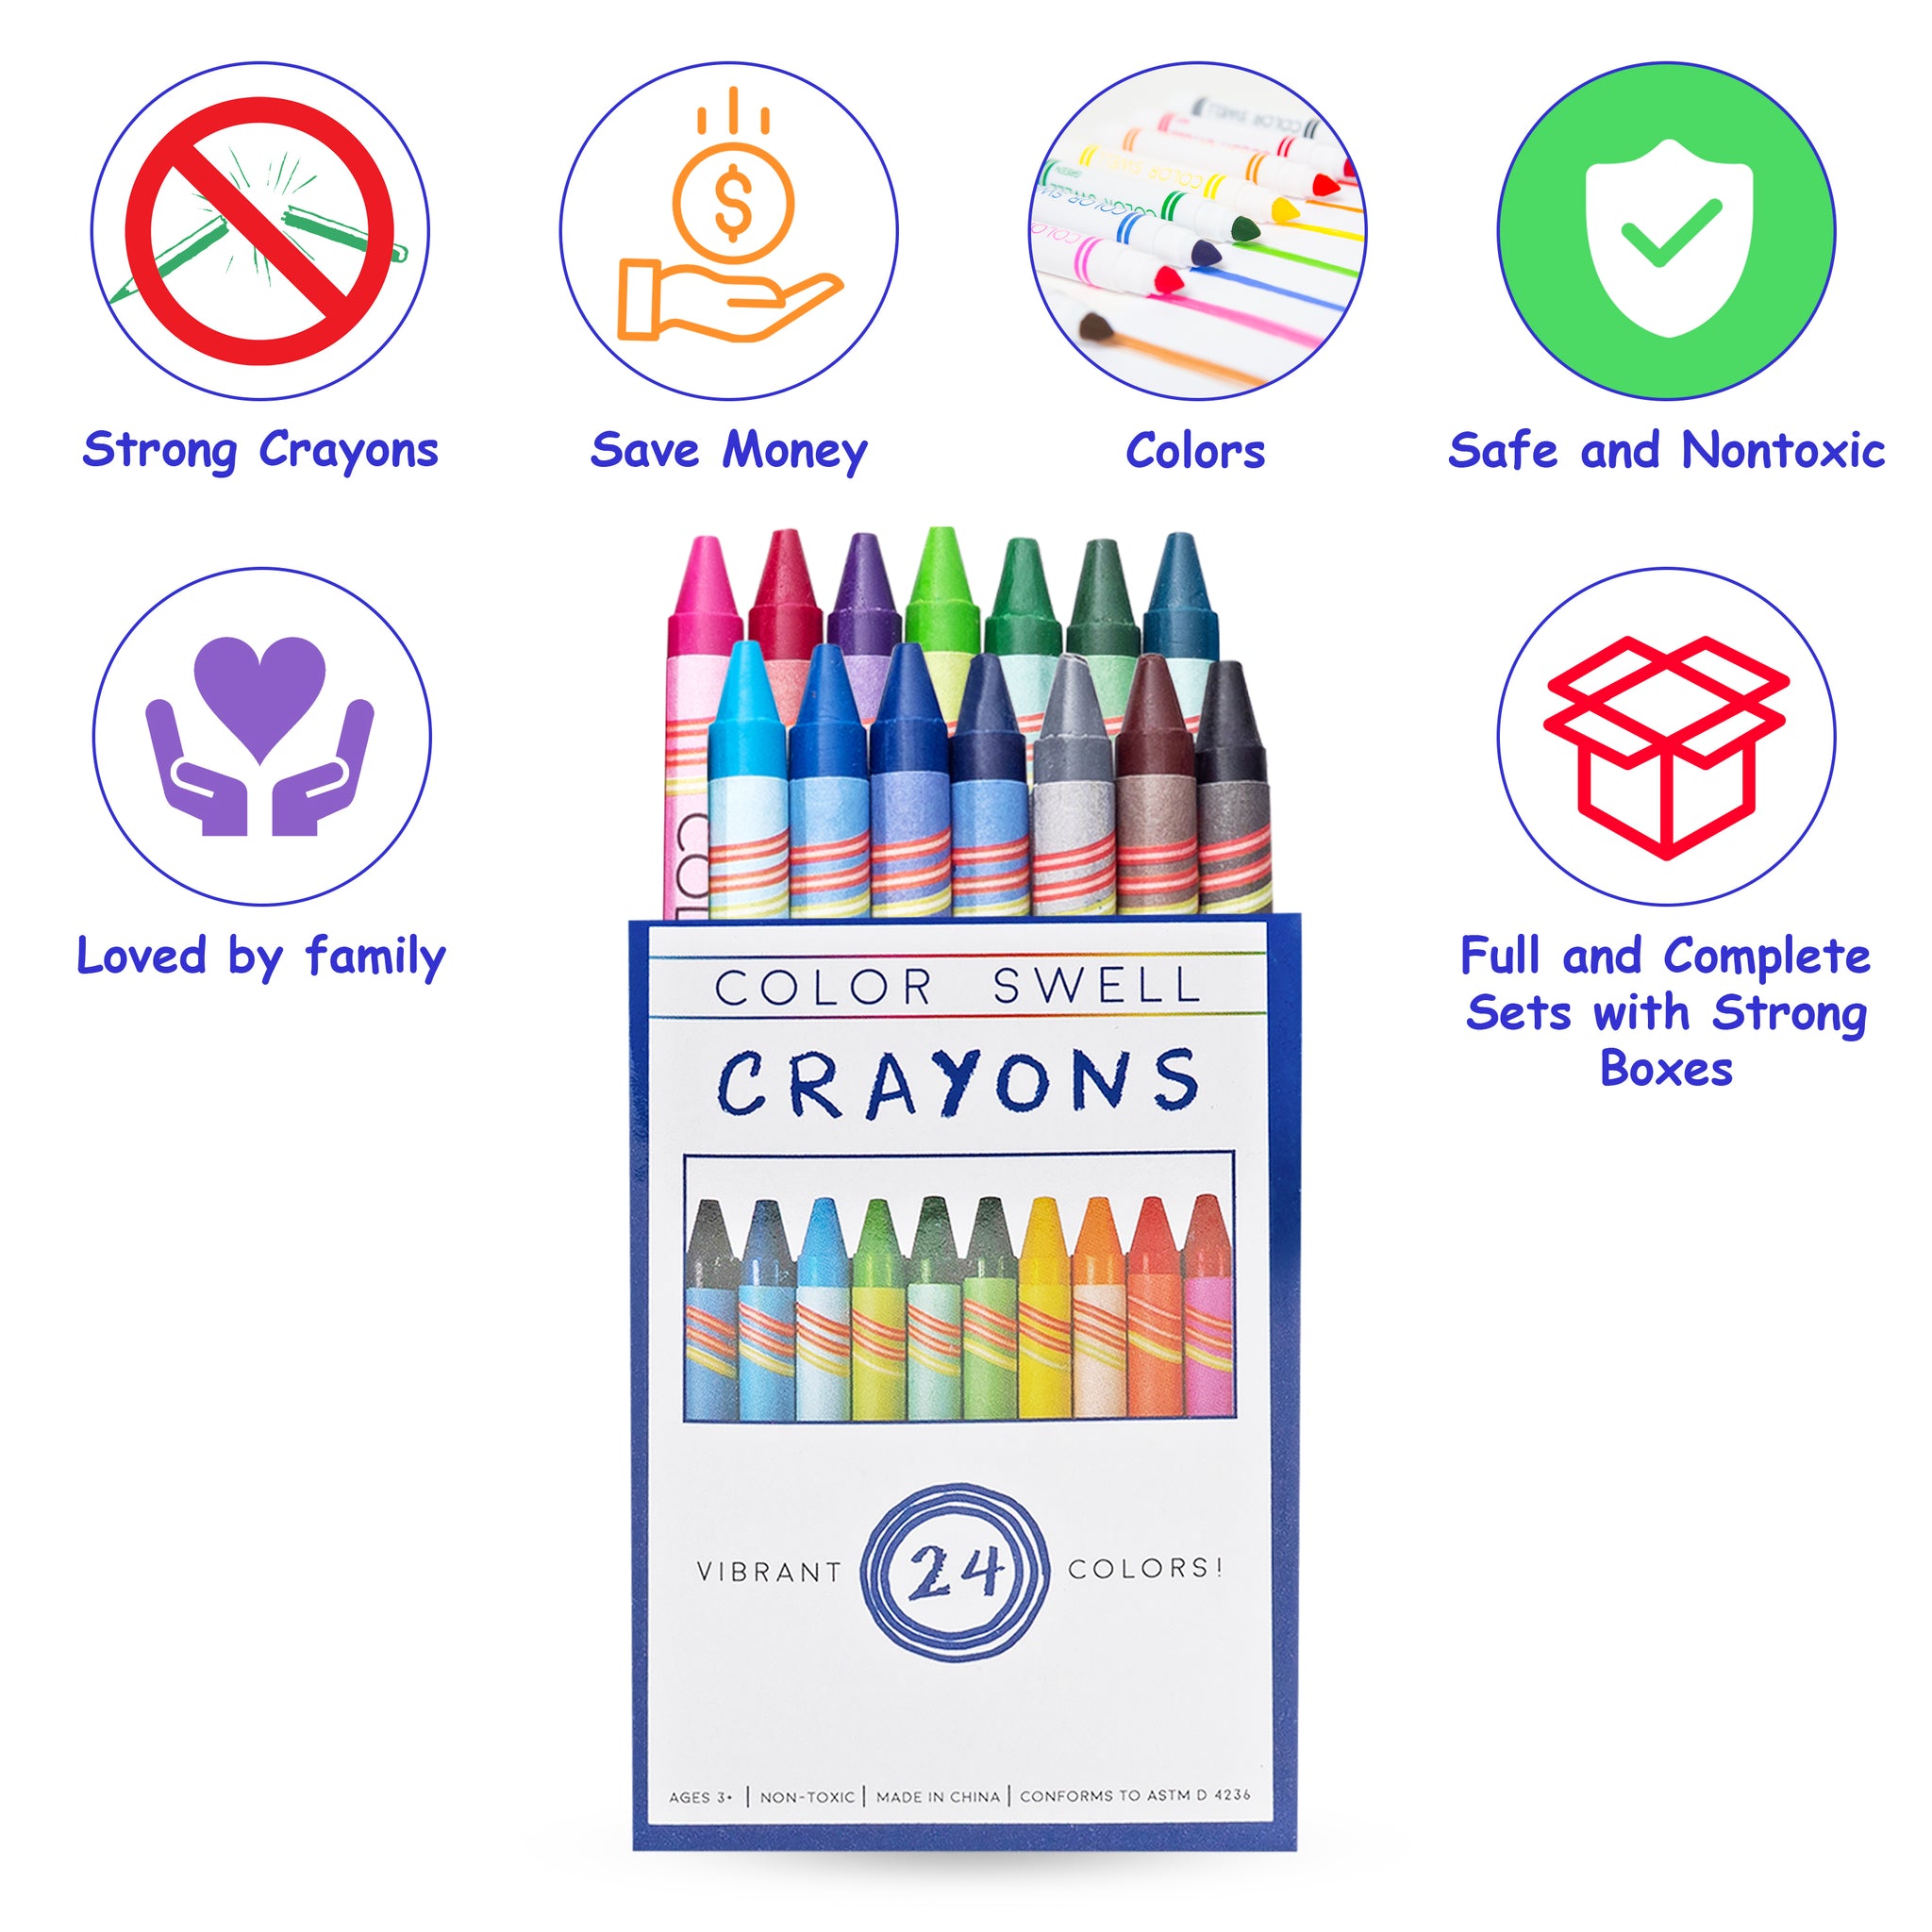 18 Packs of Crayons (24 Crayons per Pack) by Color Swell – ColorSwell